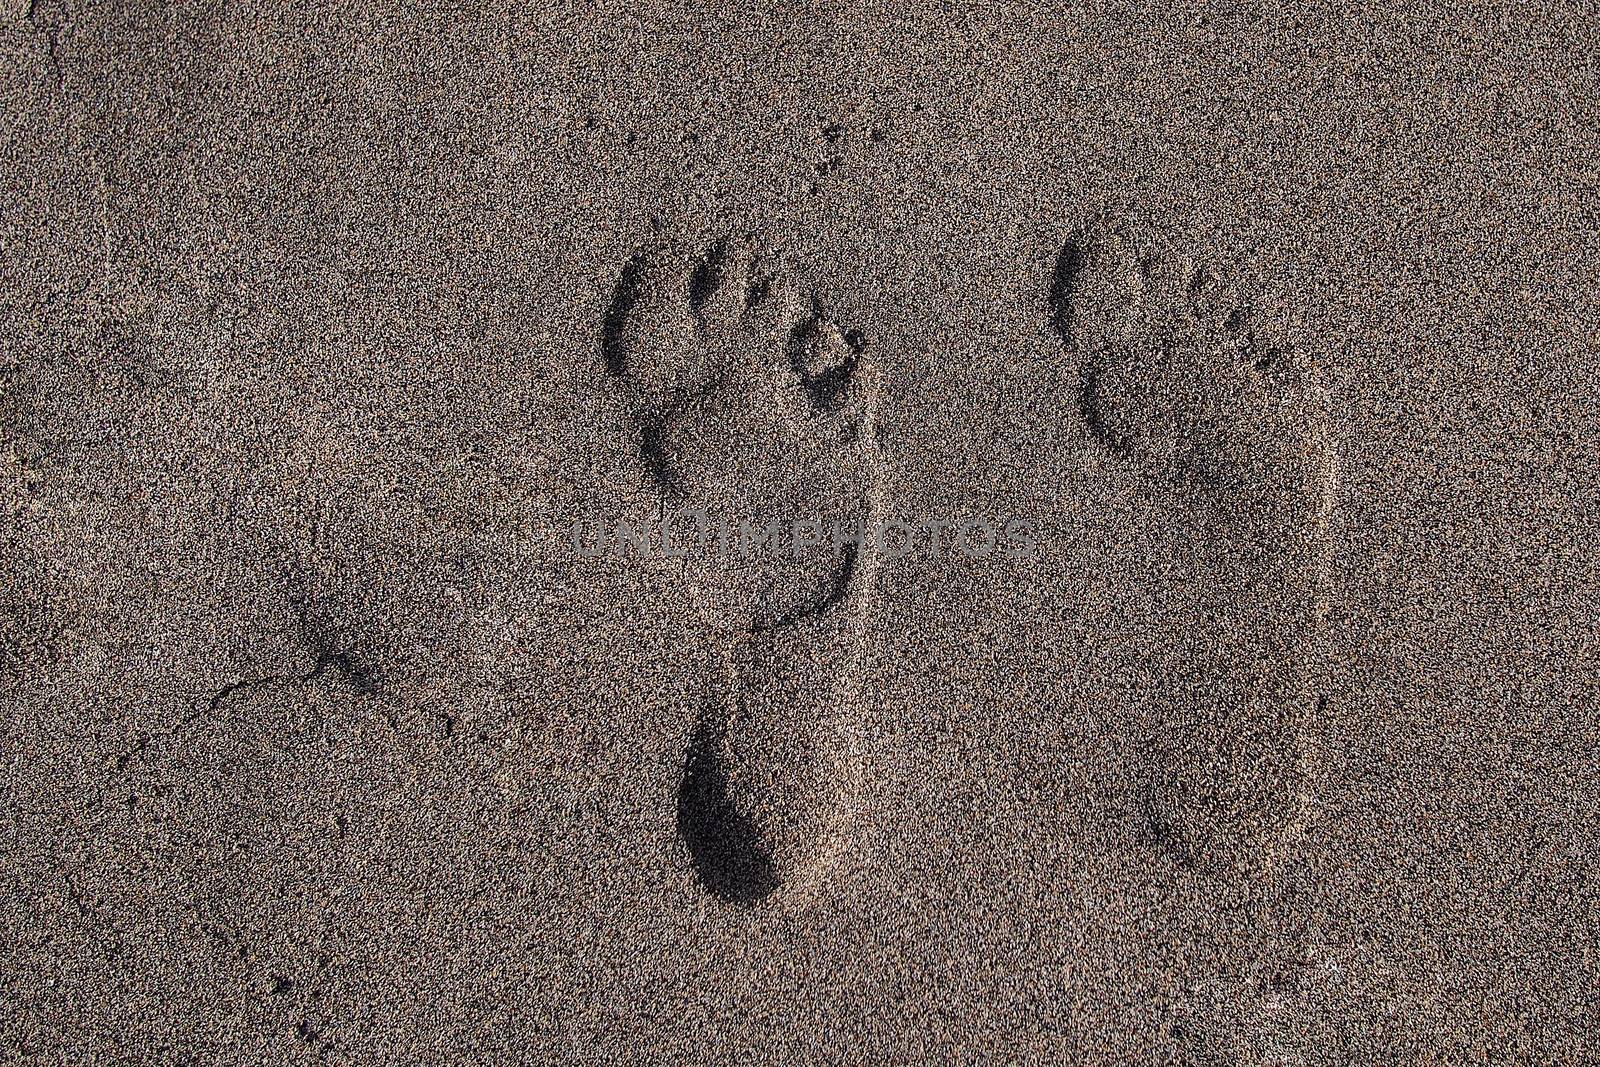 Footprints in sand at the Beach by stockyimages